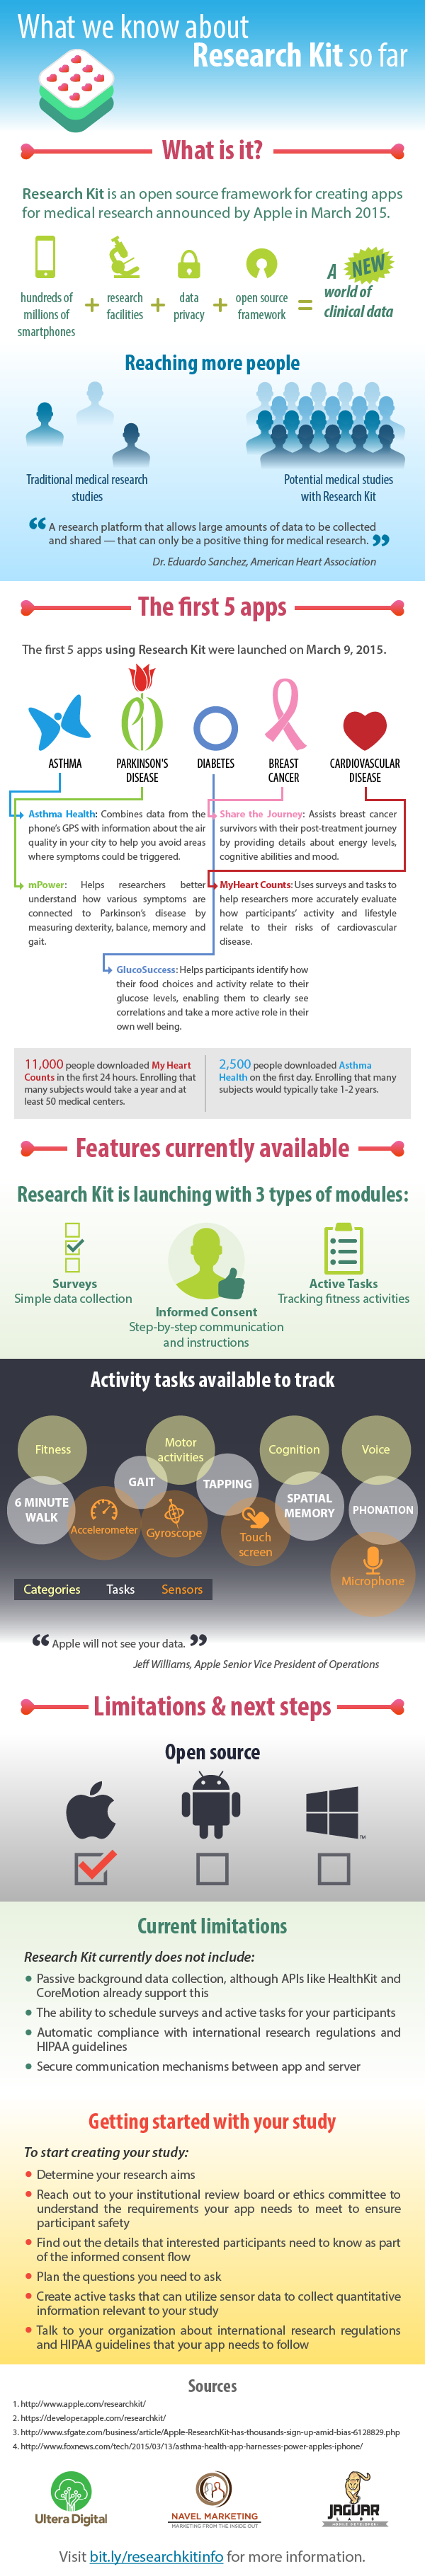 Infographic: What we know about Research Kit so far